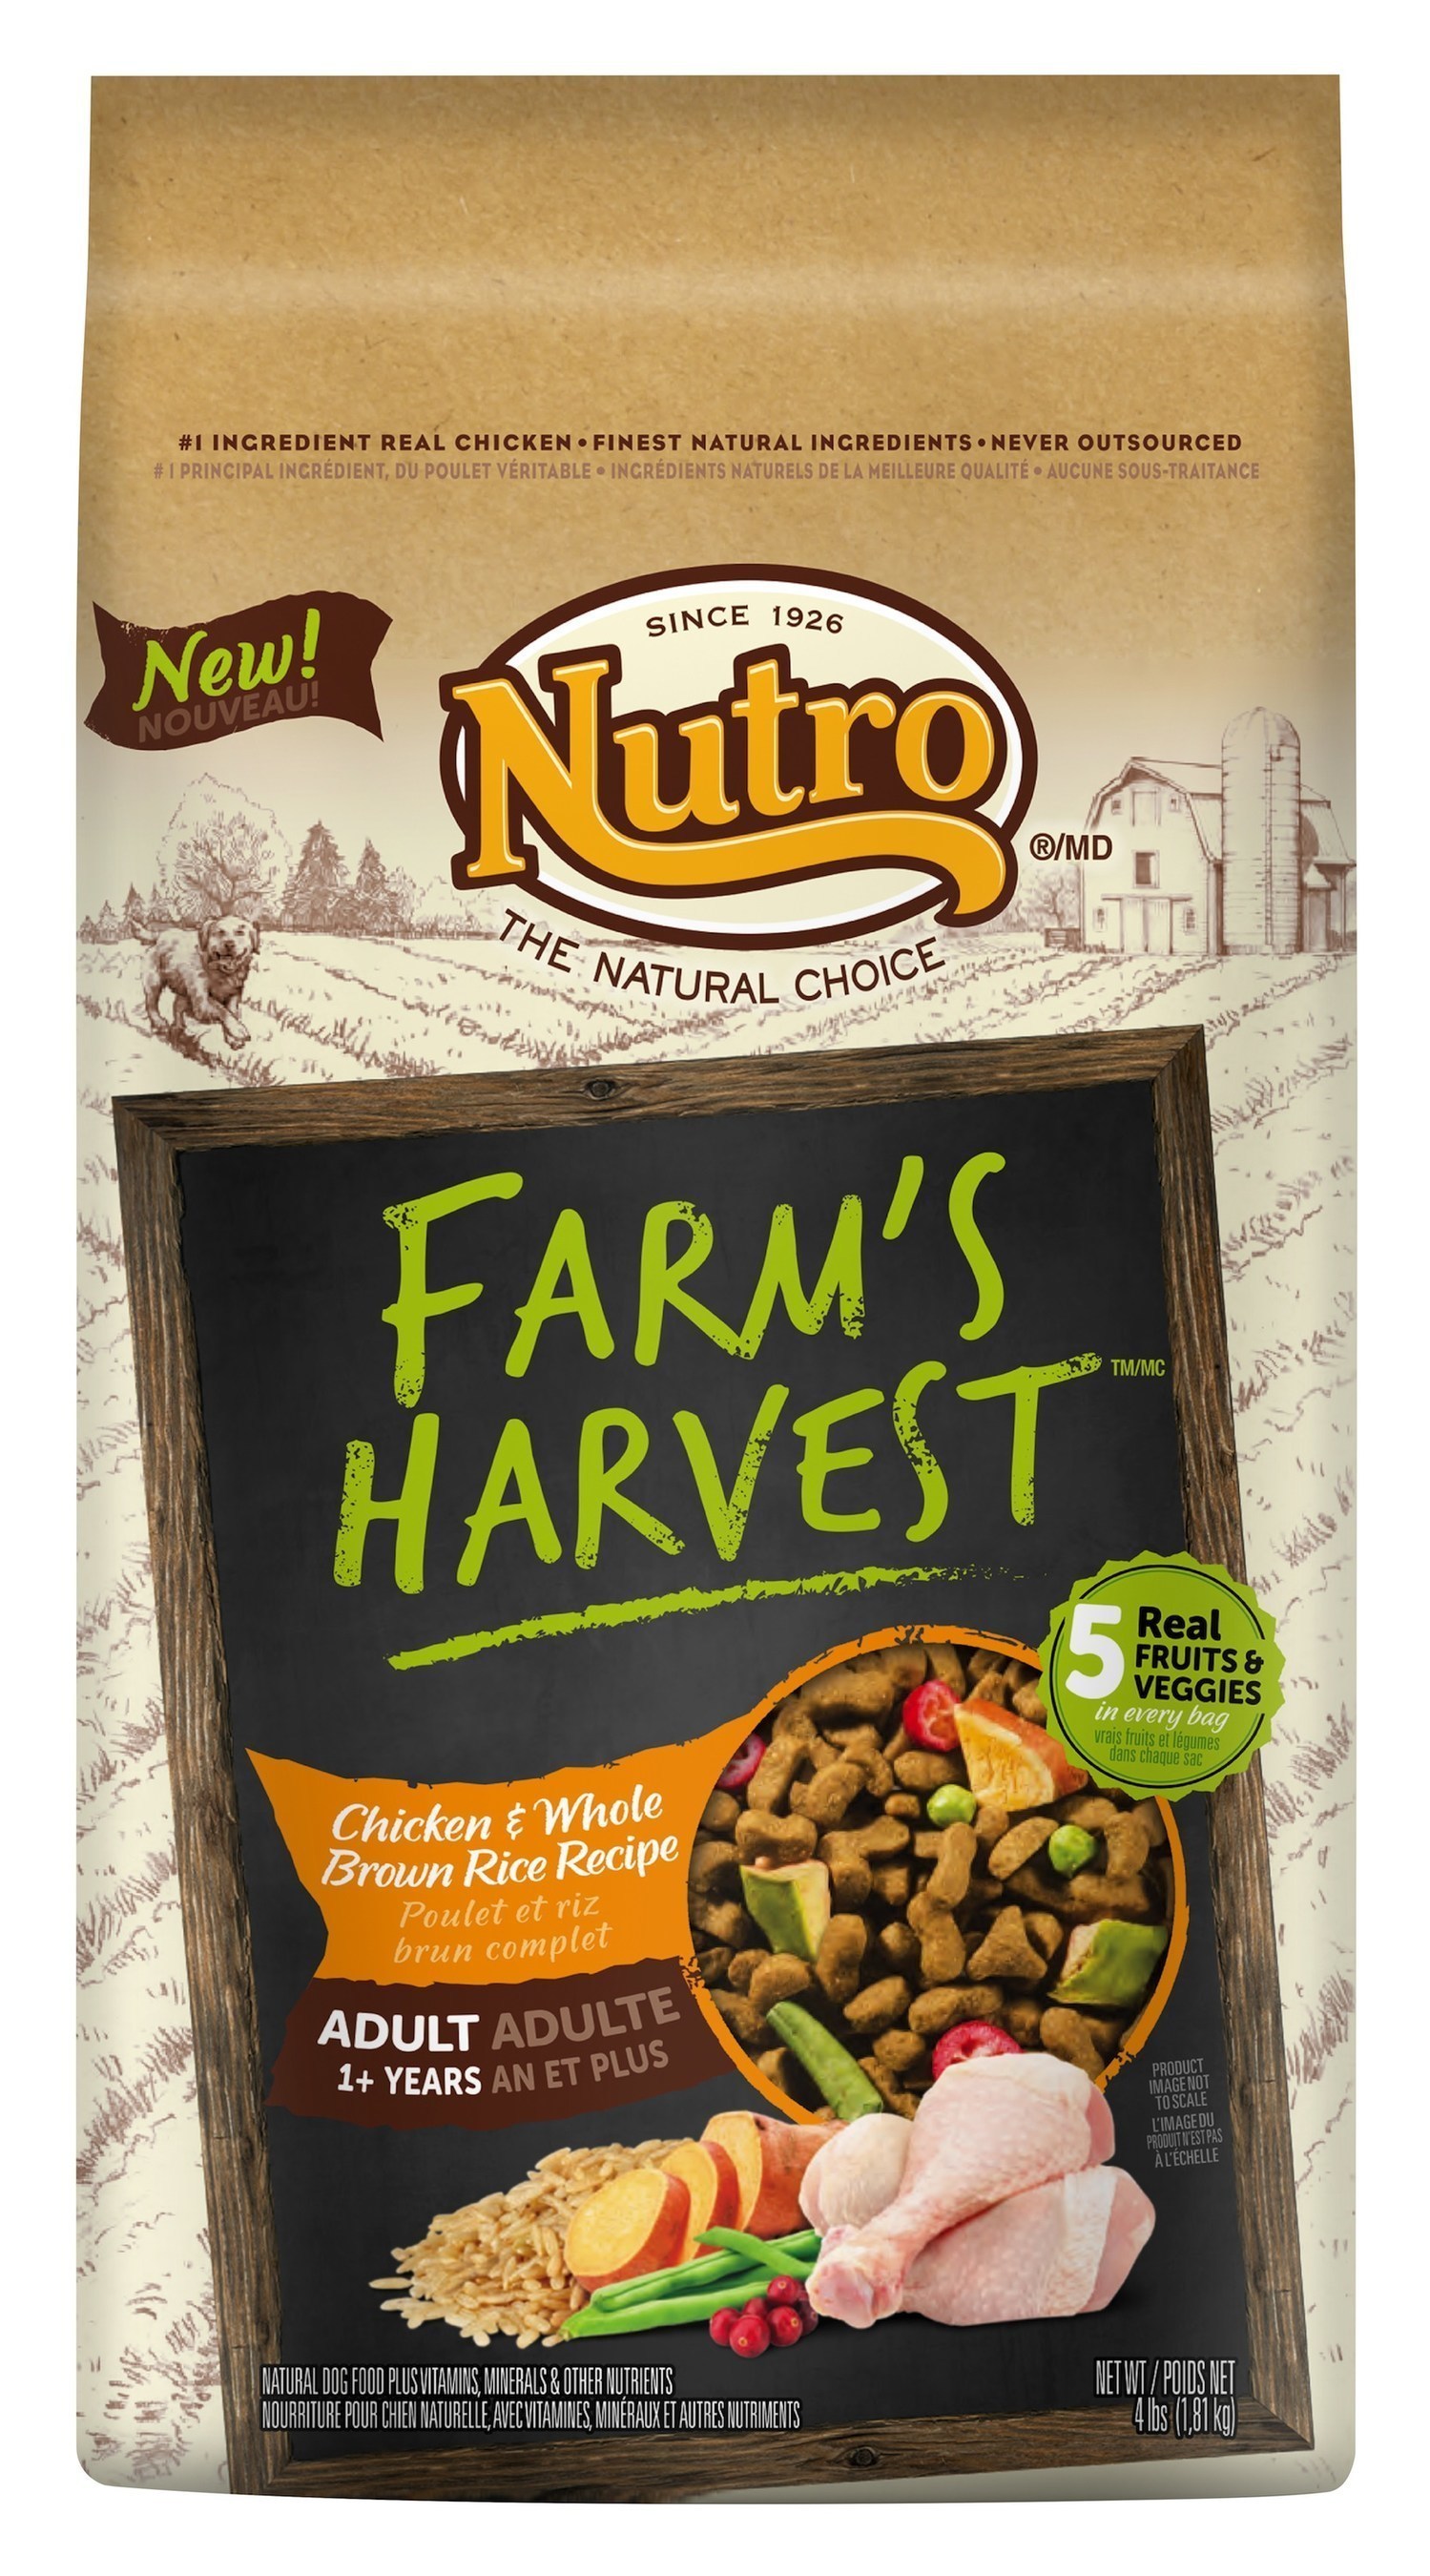 NUTRO(TM) Brings Honesty To Pet Food With Products Pet Parents Can Trust - And Dogs Will Love